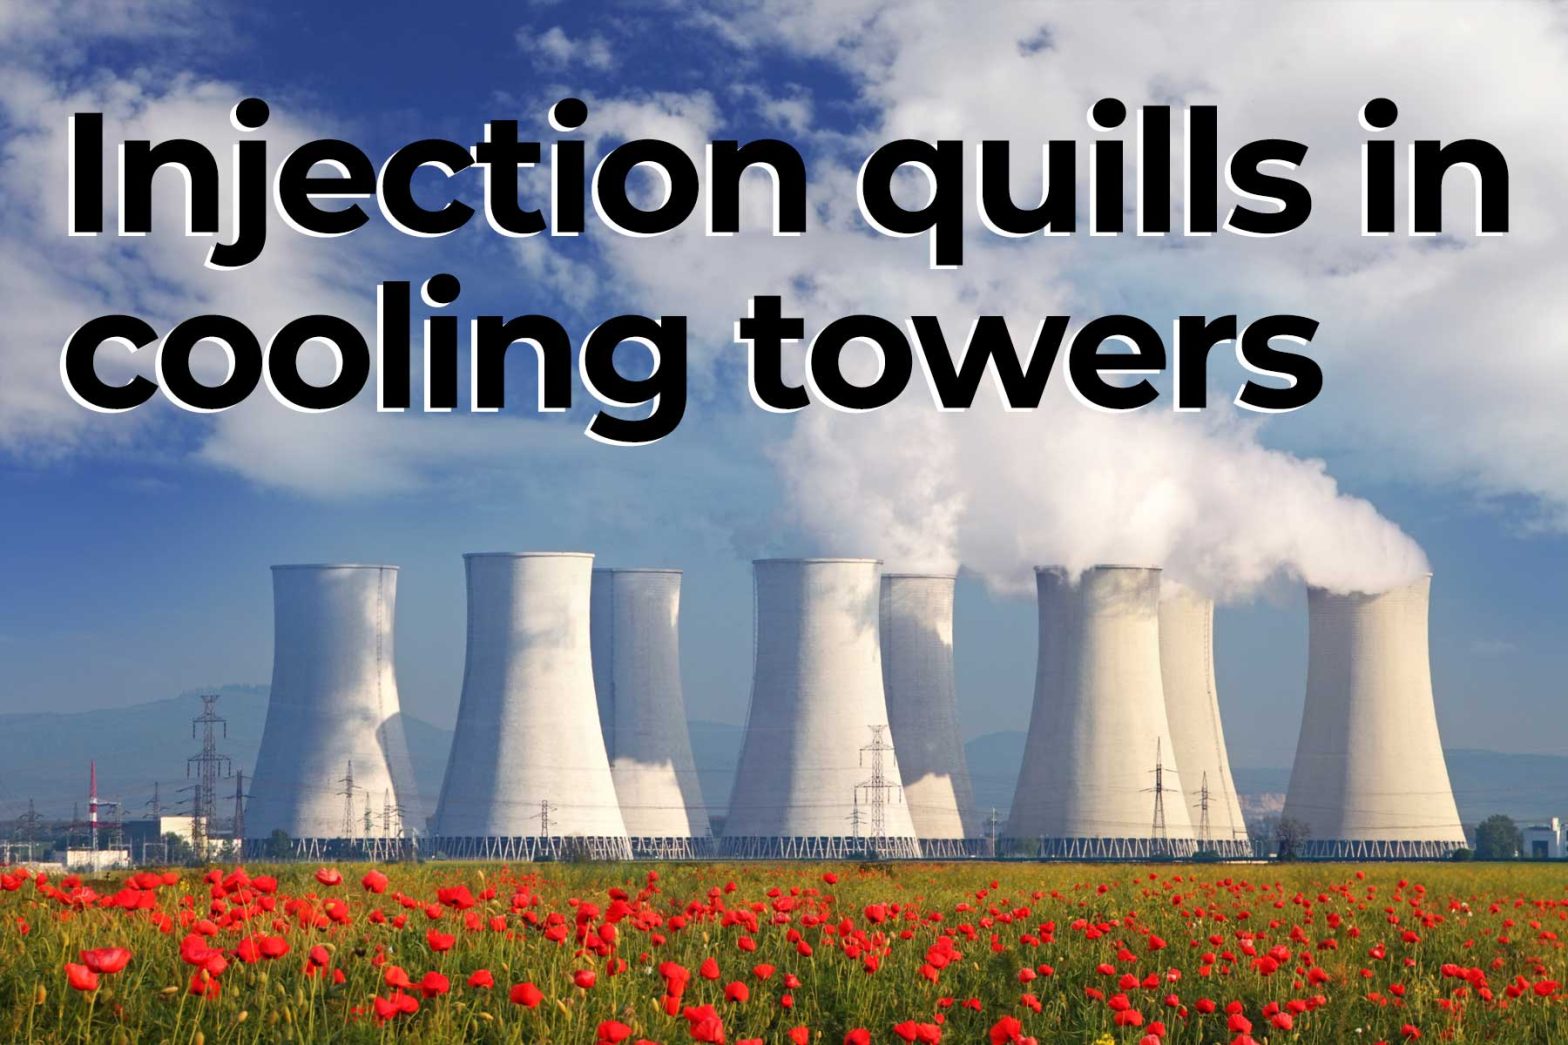 Injection quills for cooling towers